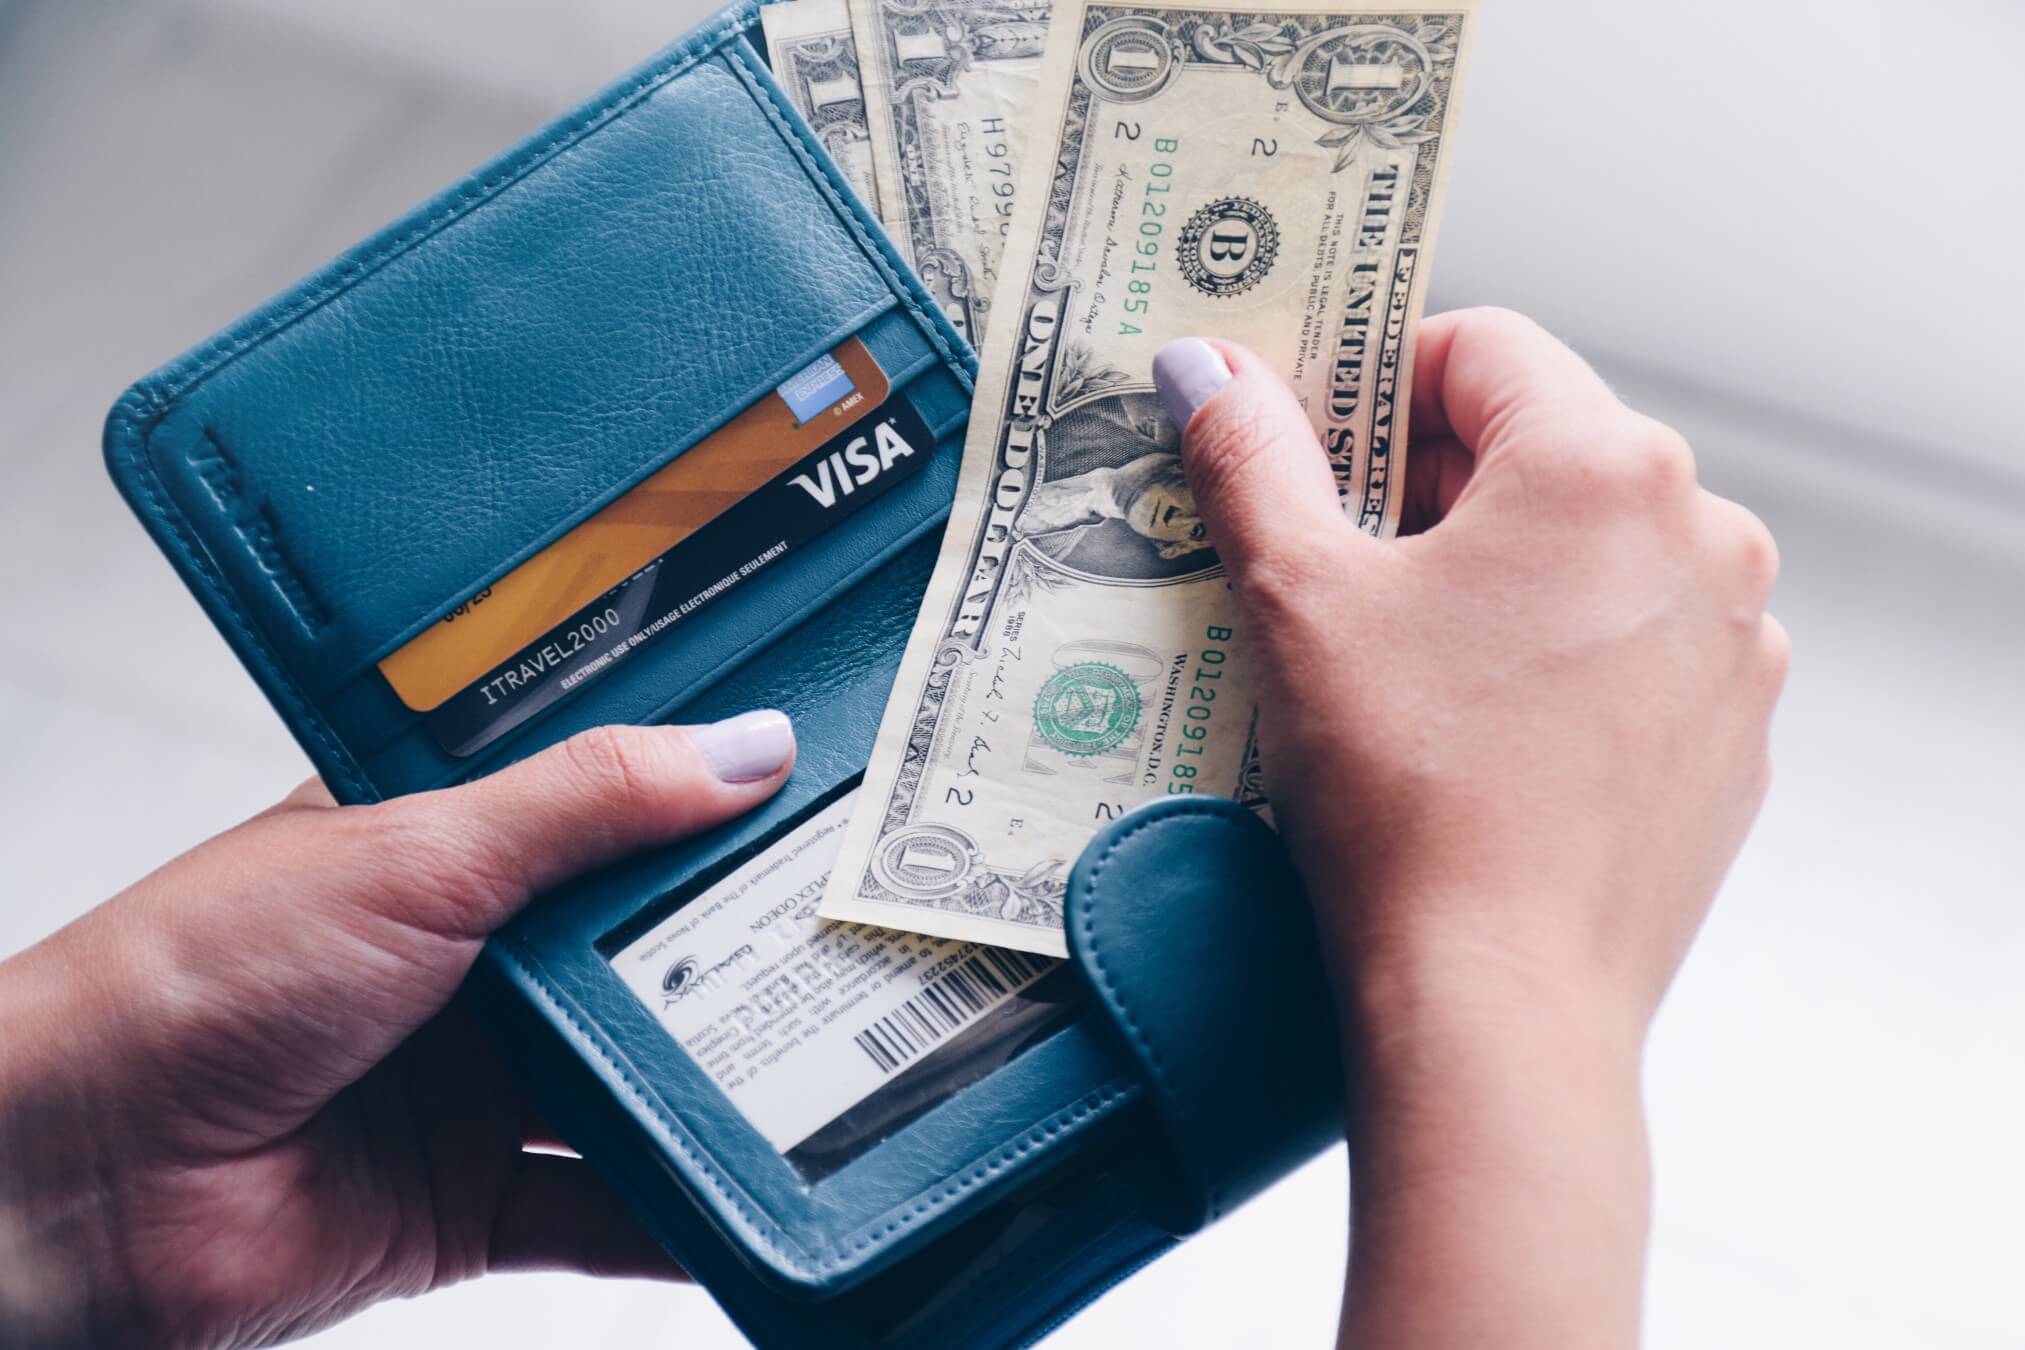 How to Deal With Losing Your Wallet: 9 Things To Do ASAP